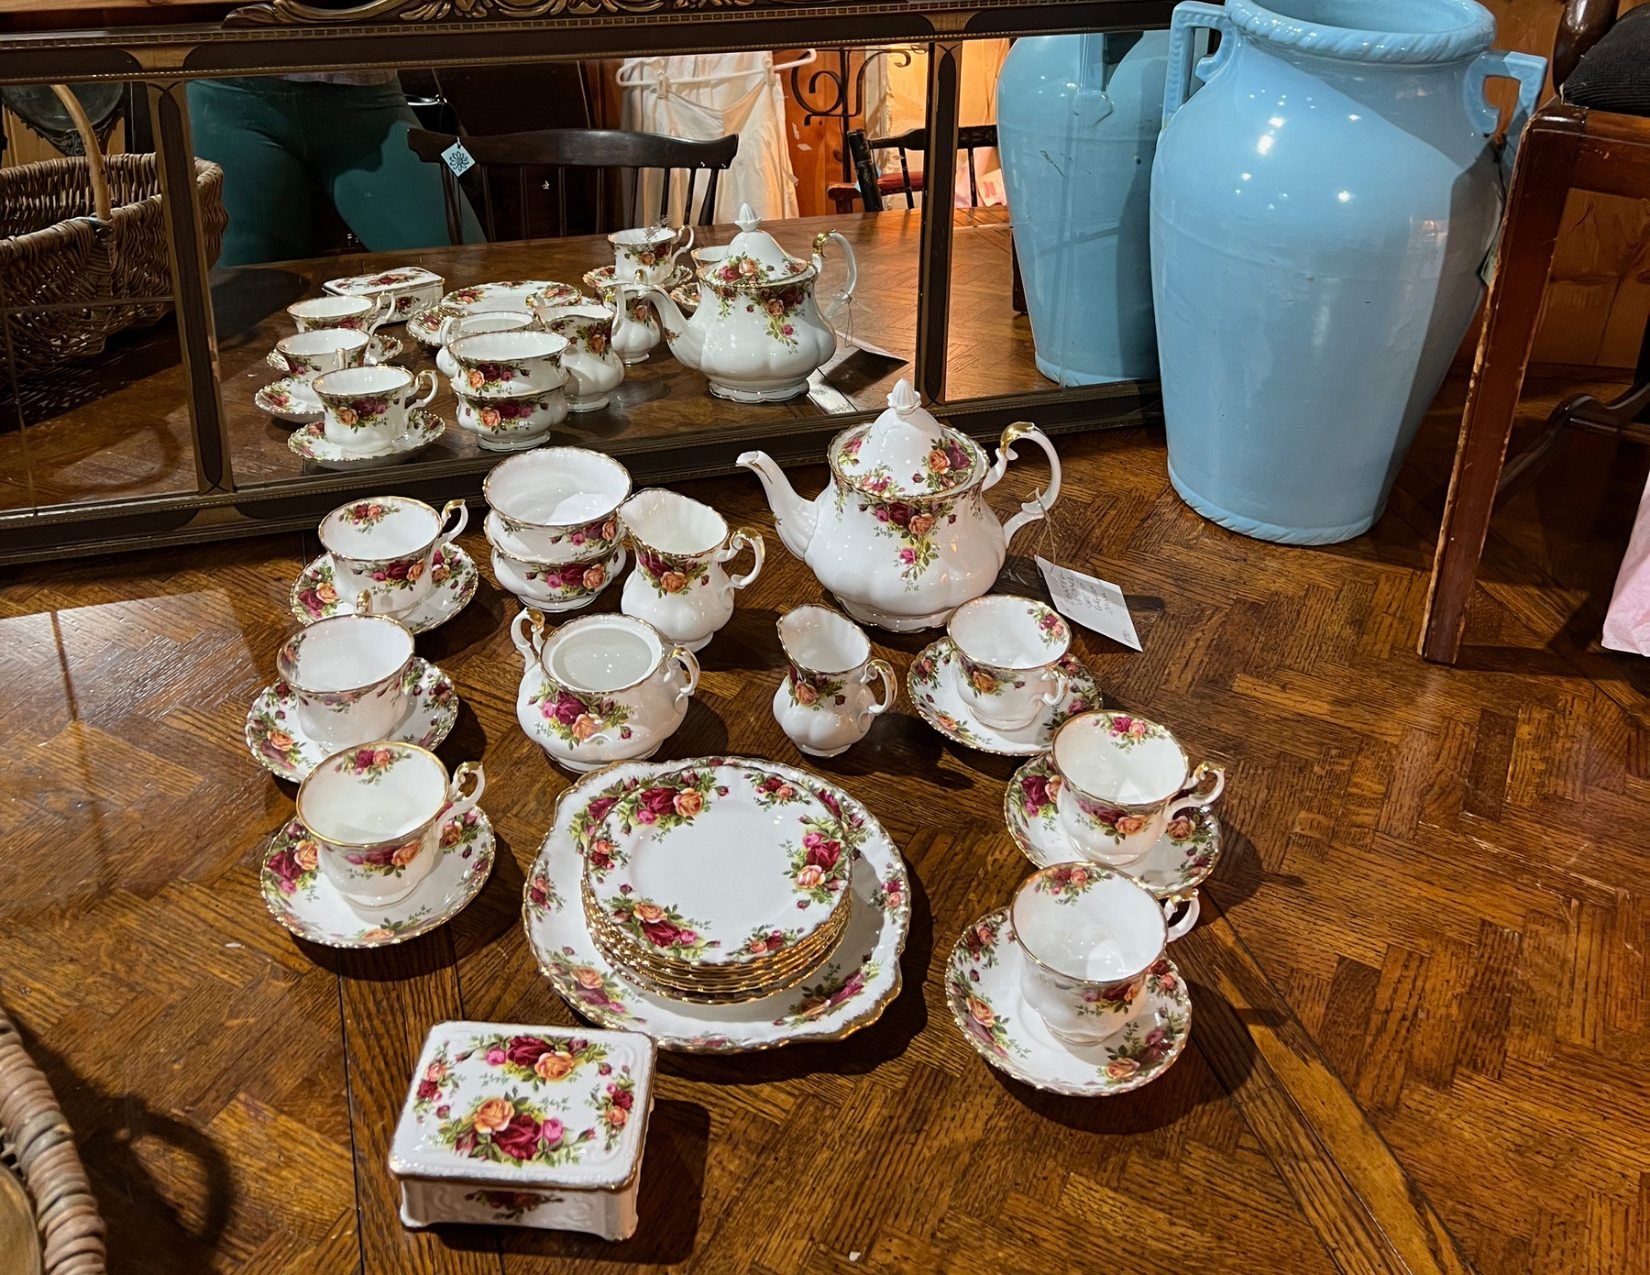 Full white tea set with pink and orange flowers in Ogunquit, Maine